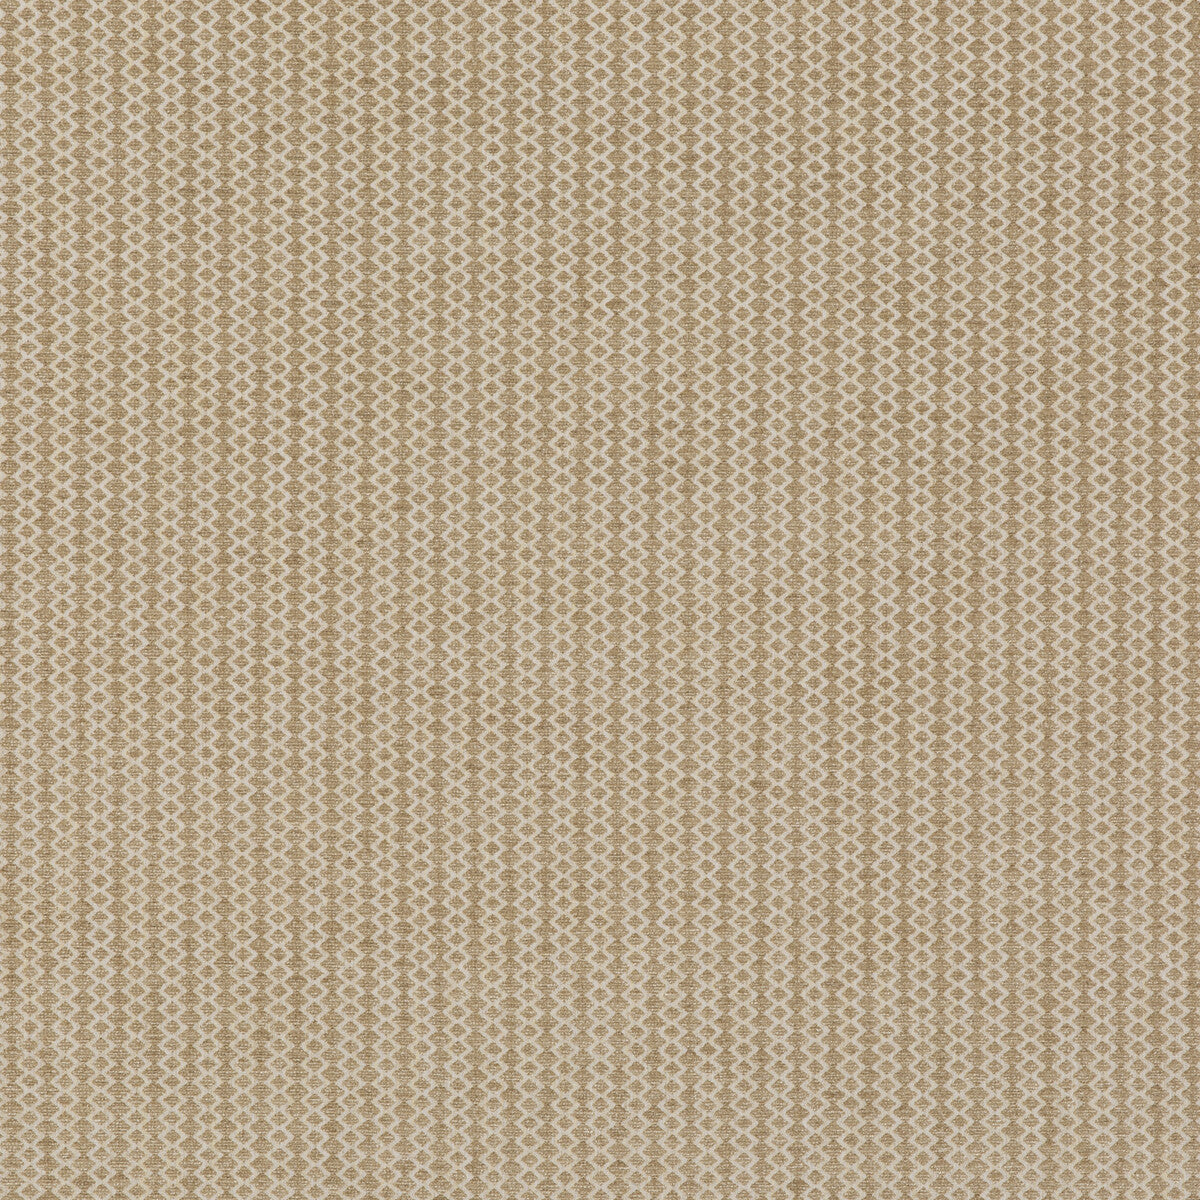 Harwood fabric in sand color - pattern BF10958.130.0 - by G P &amp; J Baker in the Baker House Textures collection